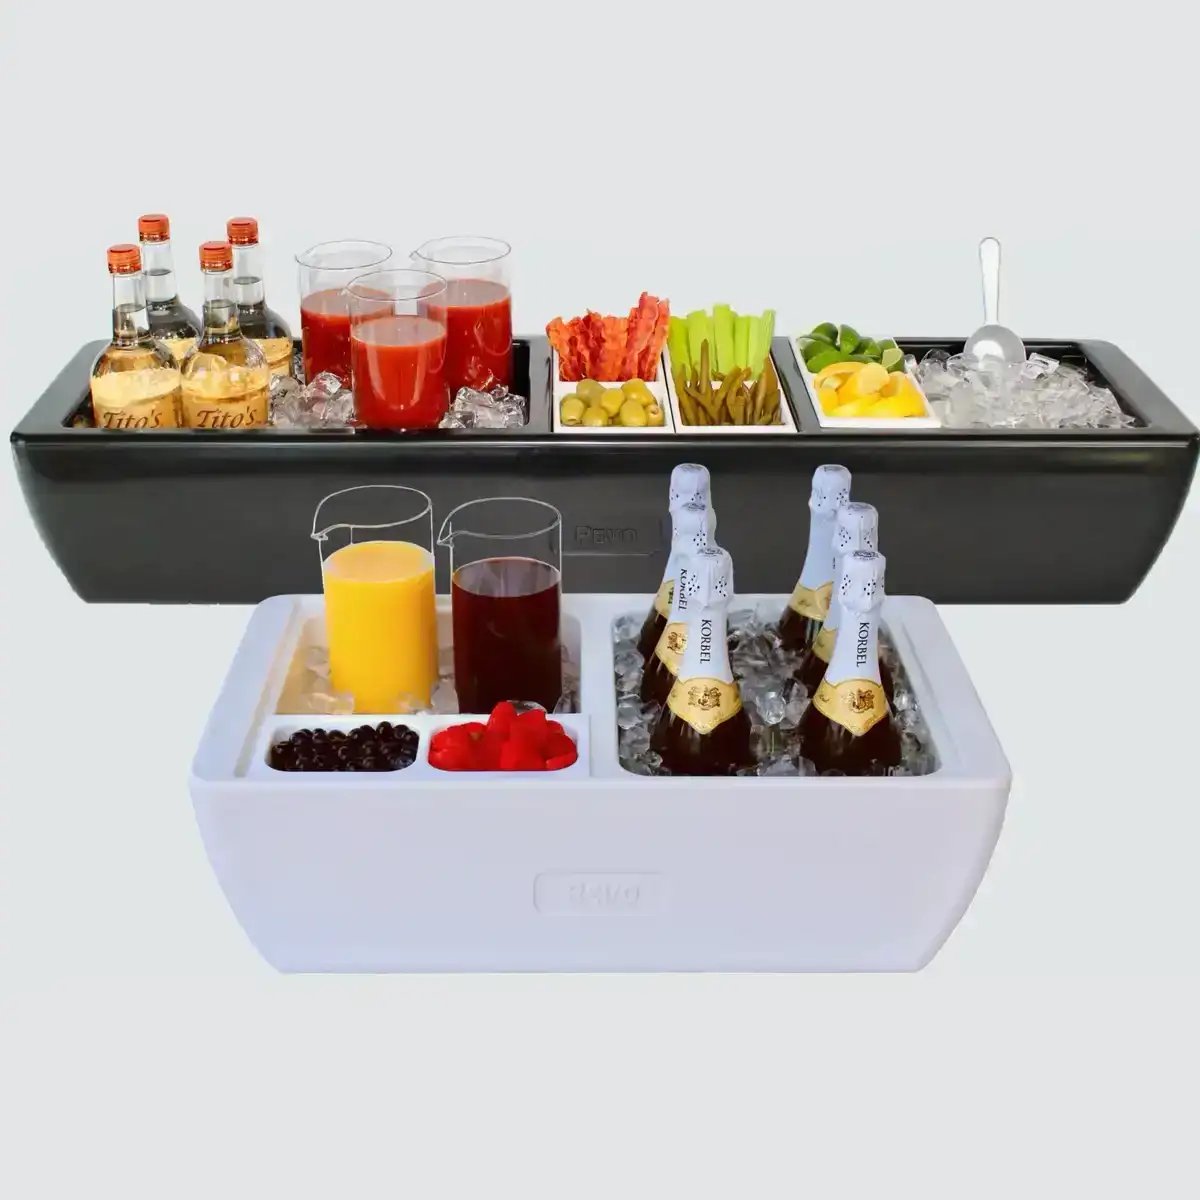 REVO Insulated Party Coolers are all-in-one bar stations for easy entertaining and no condensation mess.